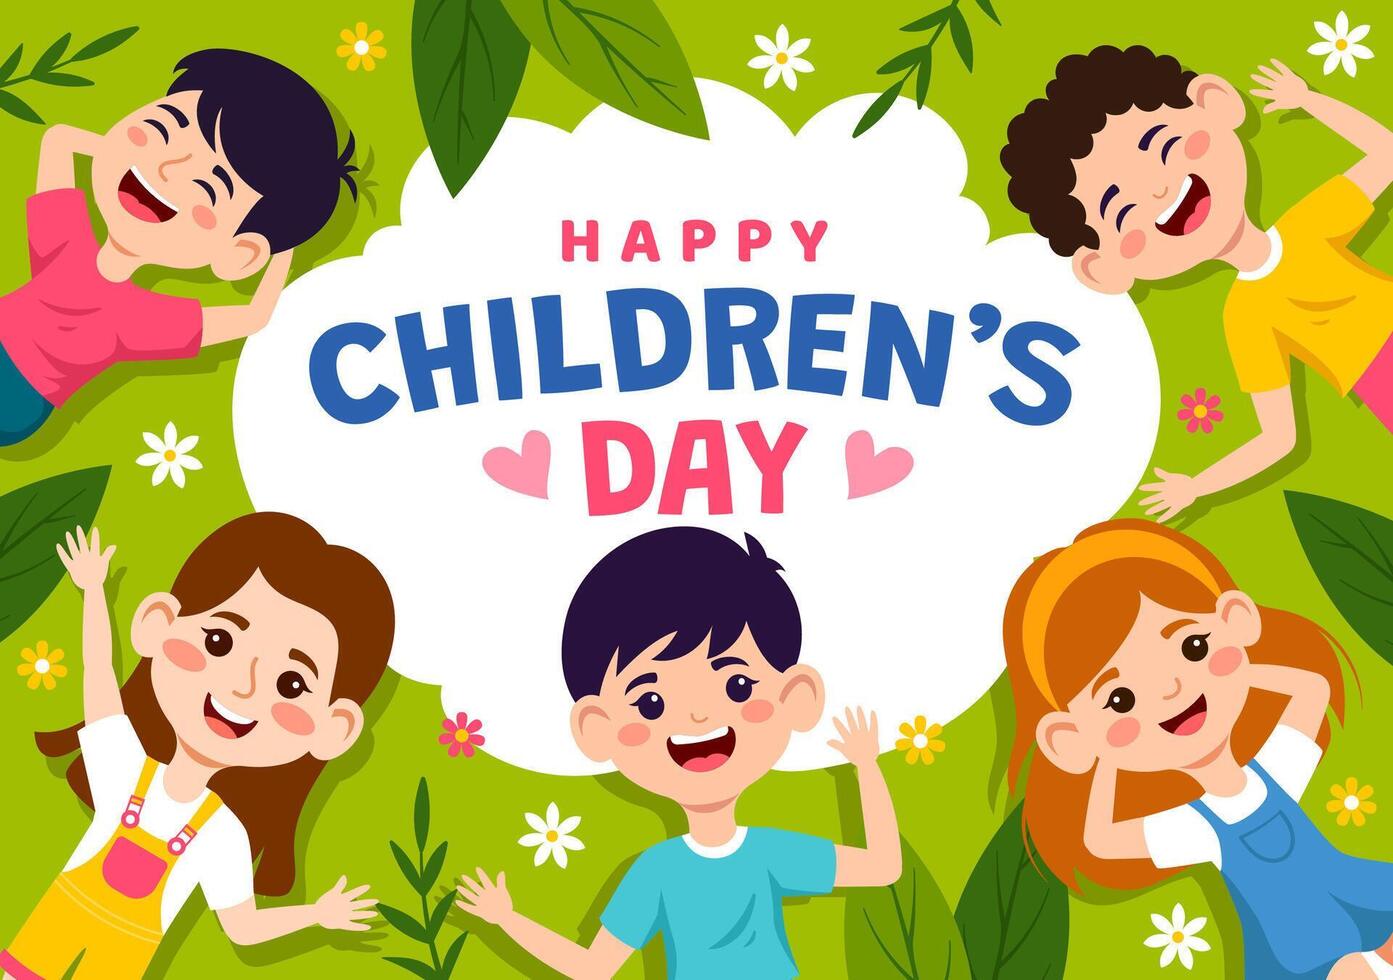 Happy Children's Day Vector Illustration with Kids Togetherness in Children Celebration Cartoon Bright Sky Blue Background and Green Field Design